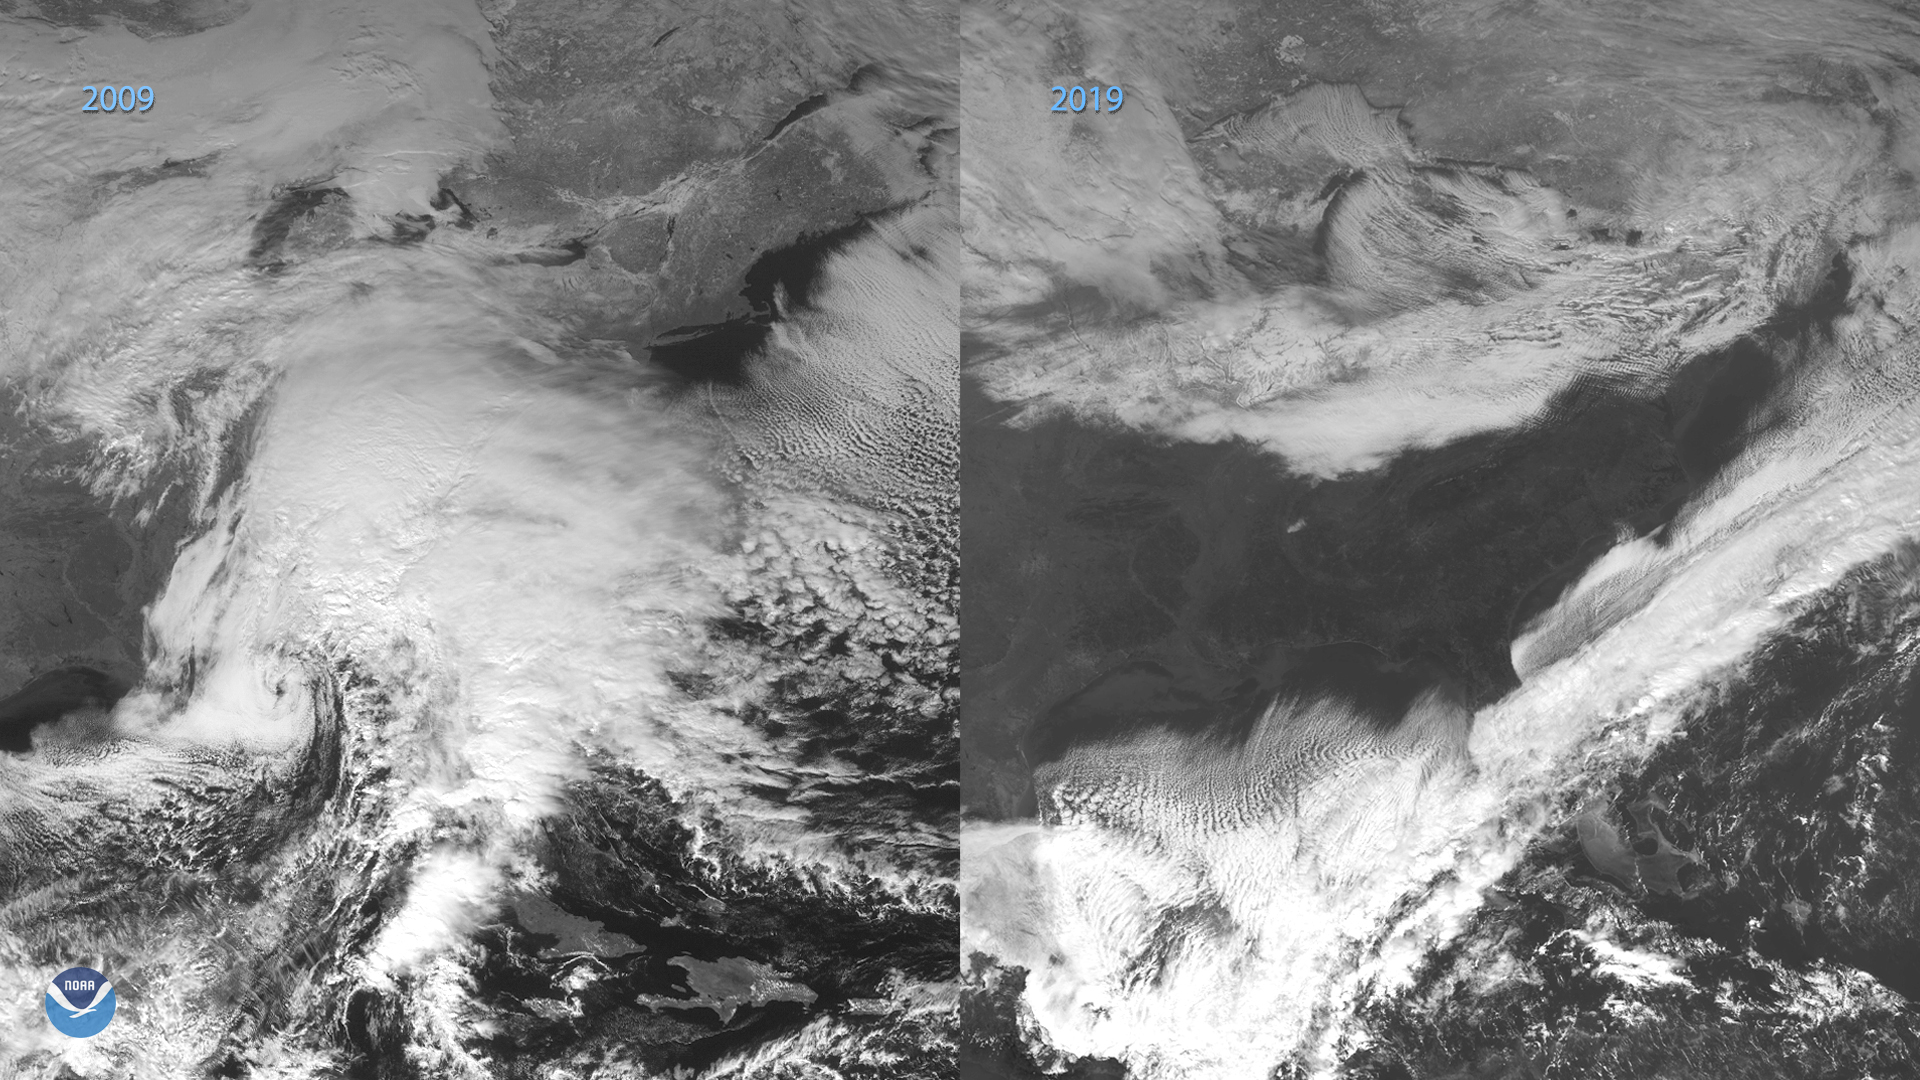 Then and Now—The Blizzard of 2009 vs. a Chilly 2019